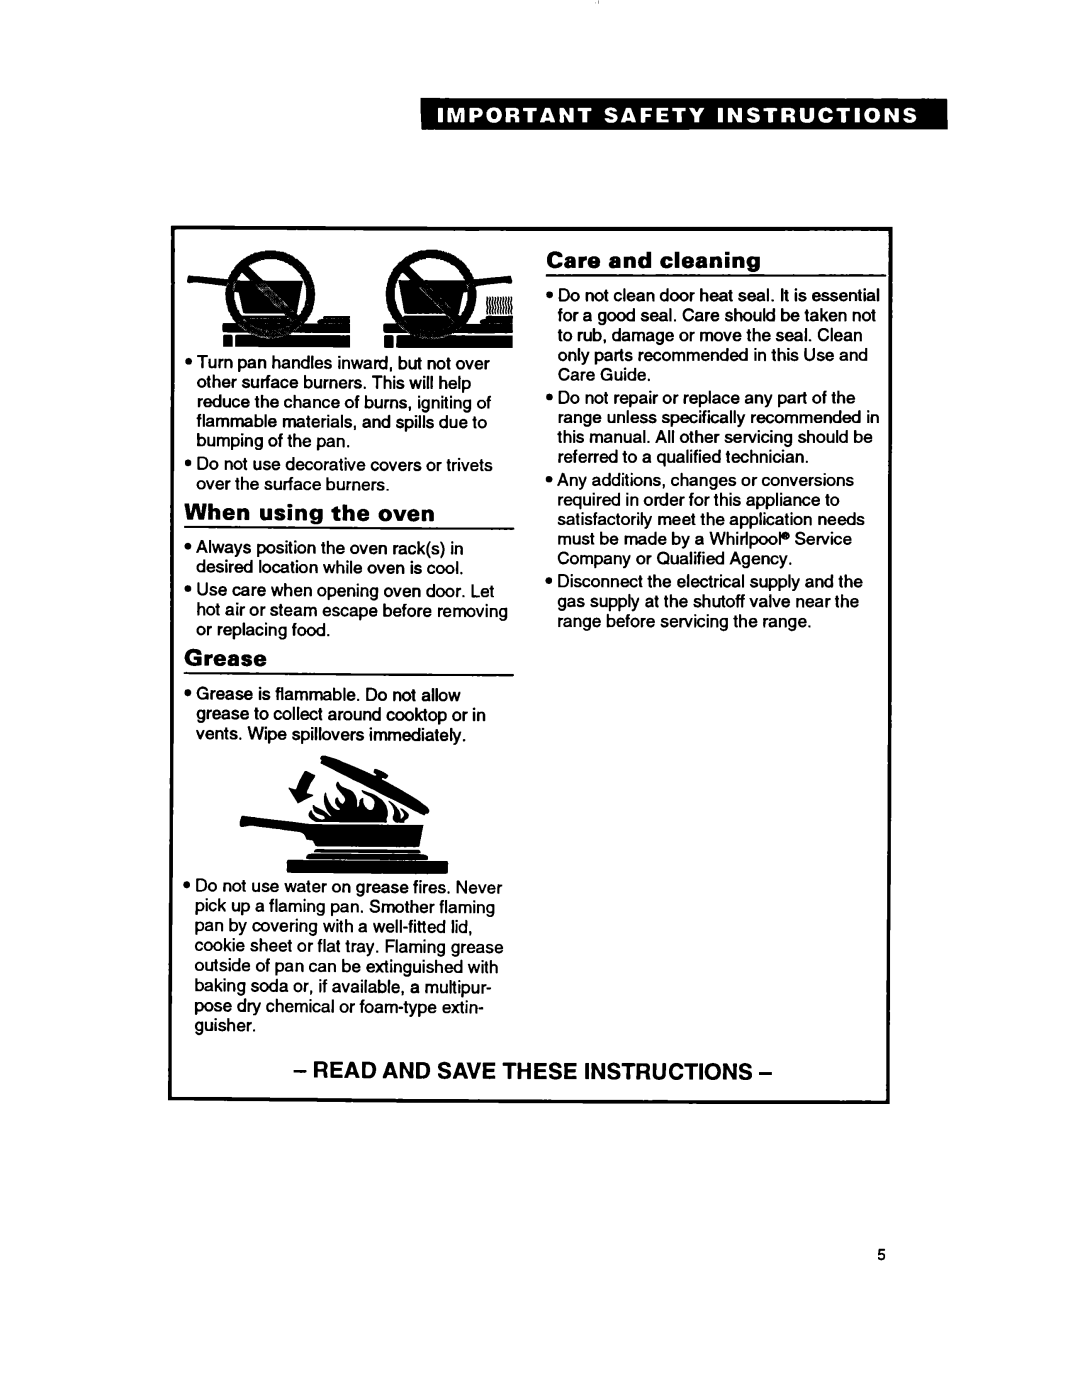 Whirlpool TGR61W2B manual Read And Save These Instructions, When using the oven, Grease, Care and cleaning 